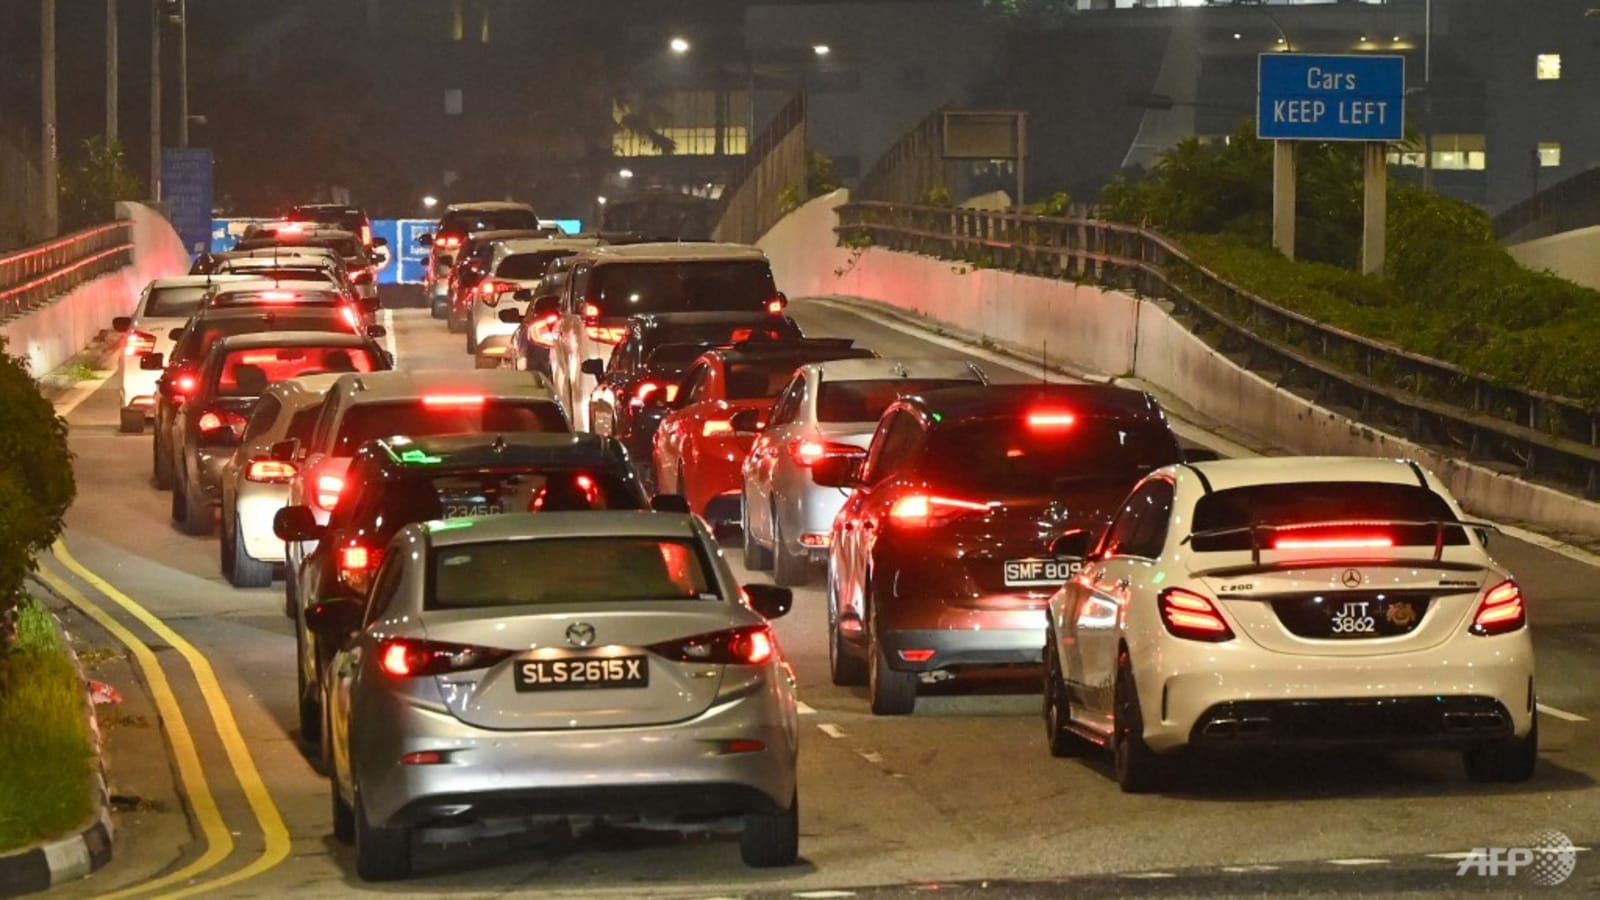 Heavy traffic expected at land checkpoints over Vesak Day long weekend: ICA